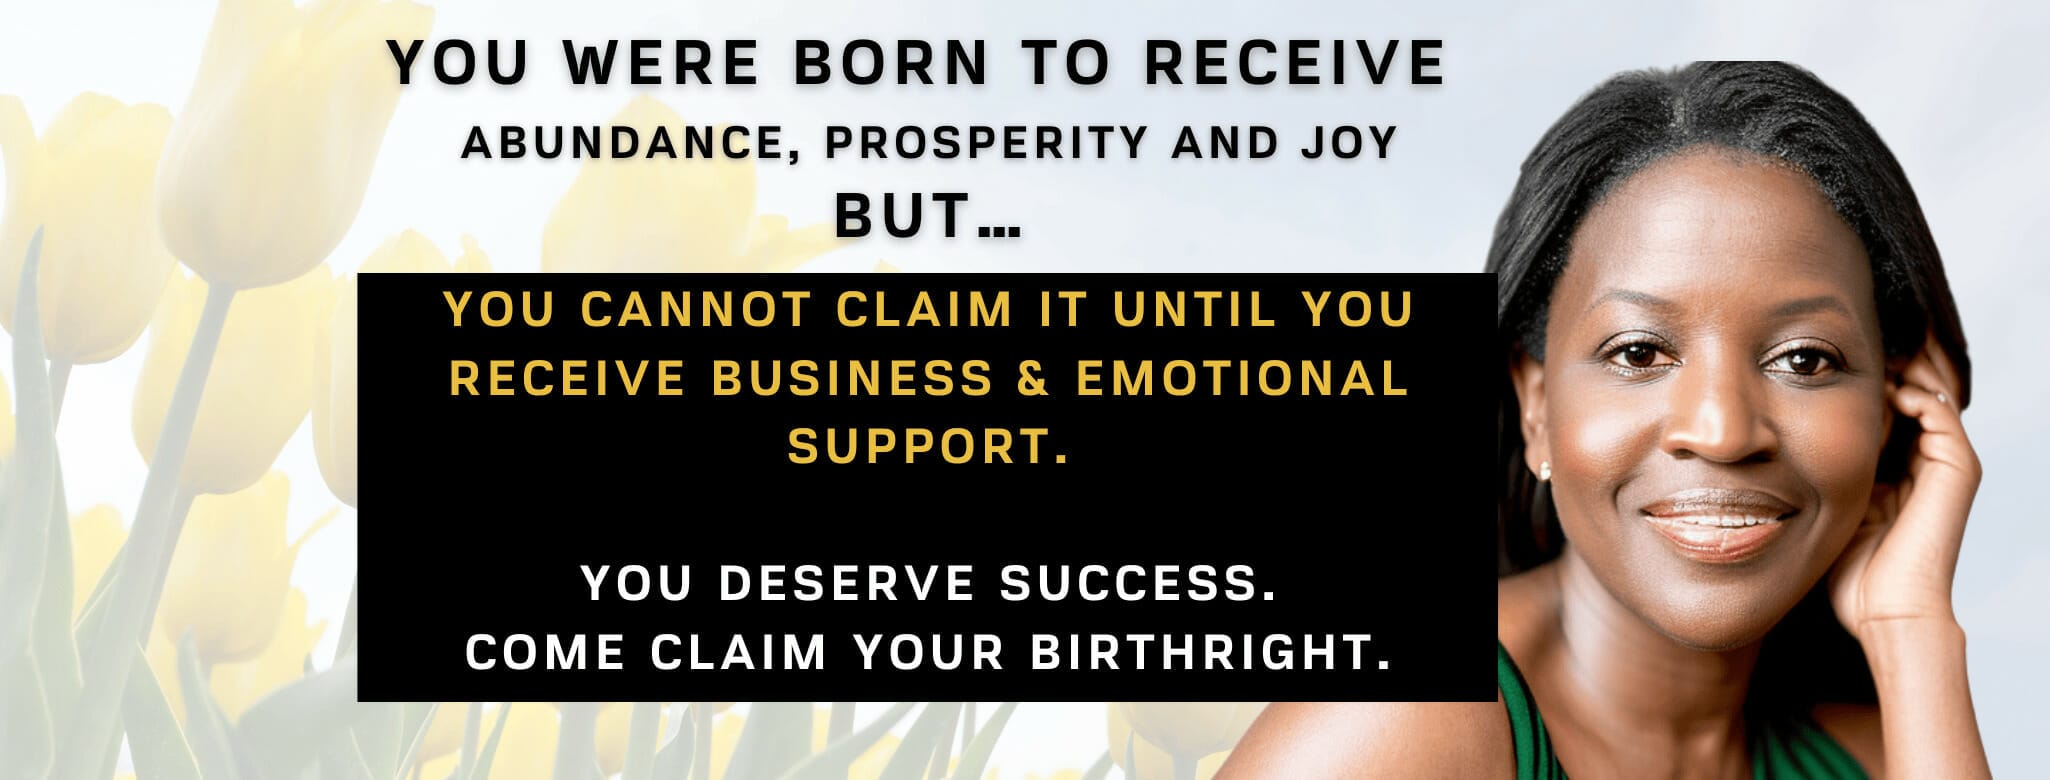 Welcome to home page of Denise G Lee. You were born to receive ABUNDANCE, Prosperity and Joy But…you cannot claim it until you receive business & emotional support. You deserve success. come claim your birthright.